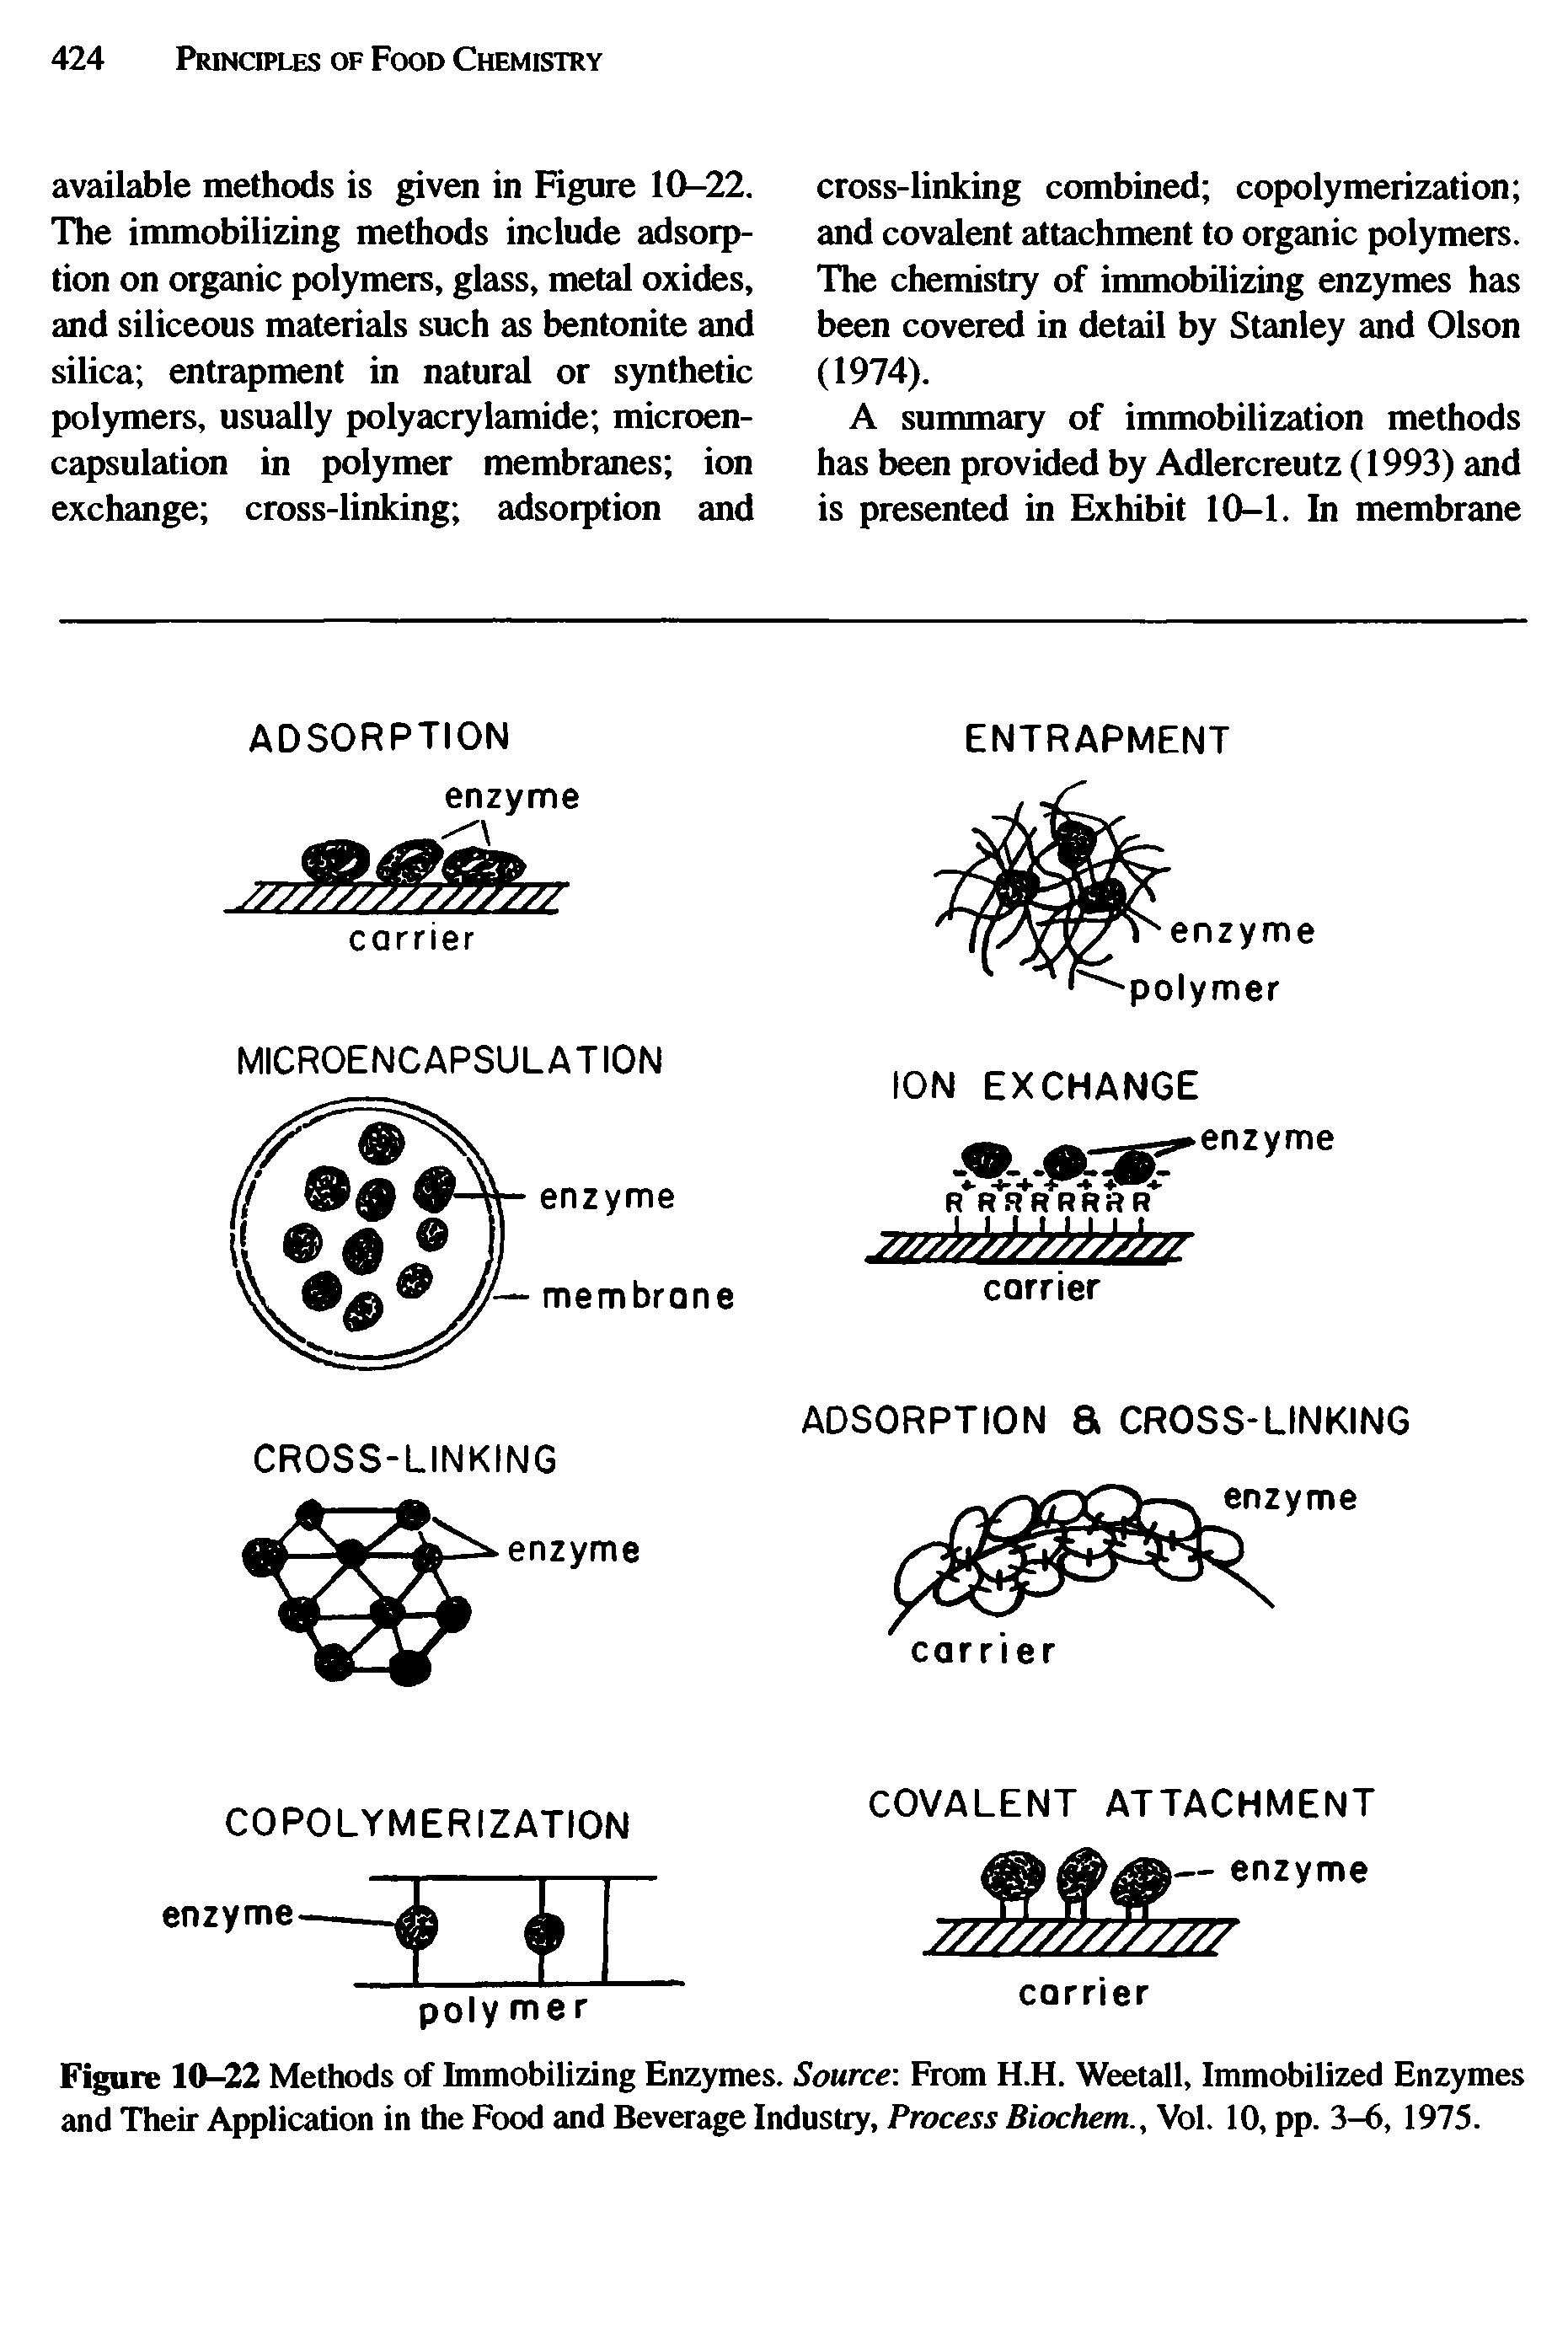 Figure 10-22 Methods of Immobilizing Enzymes. Source From H.H. Weetall, Immobilized Enzymes and Their Application in the Food and Beverage Industry, Process Biochem., Vol. 10, pp. 3-6, 1975.